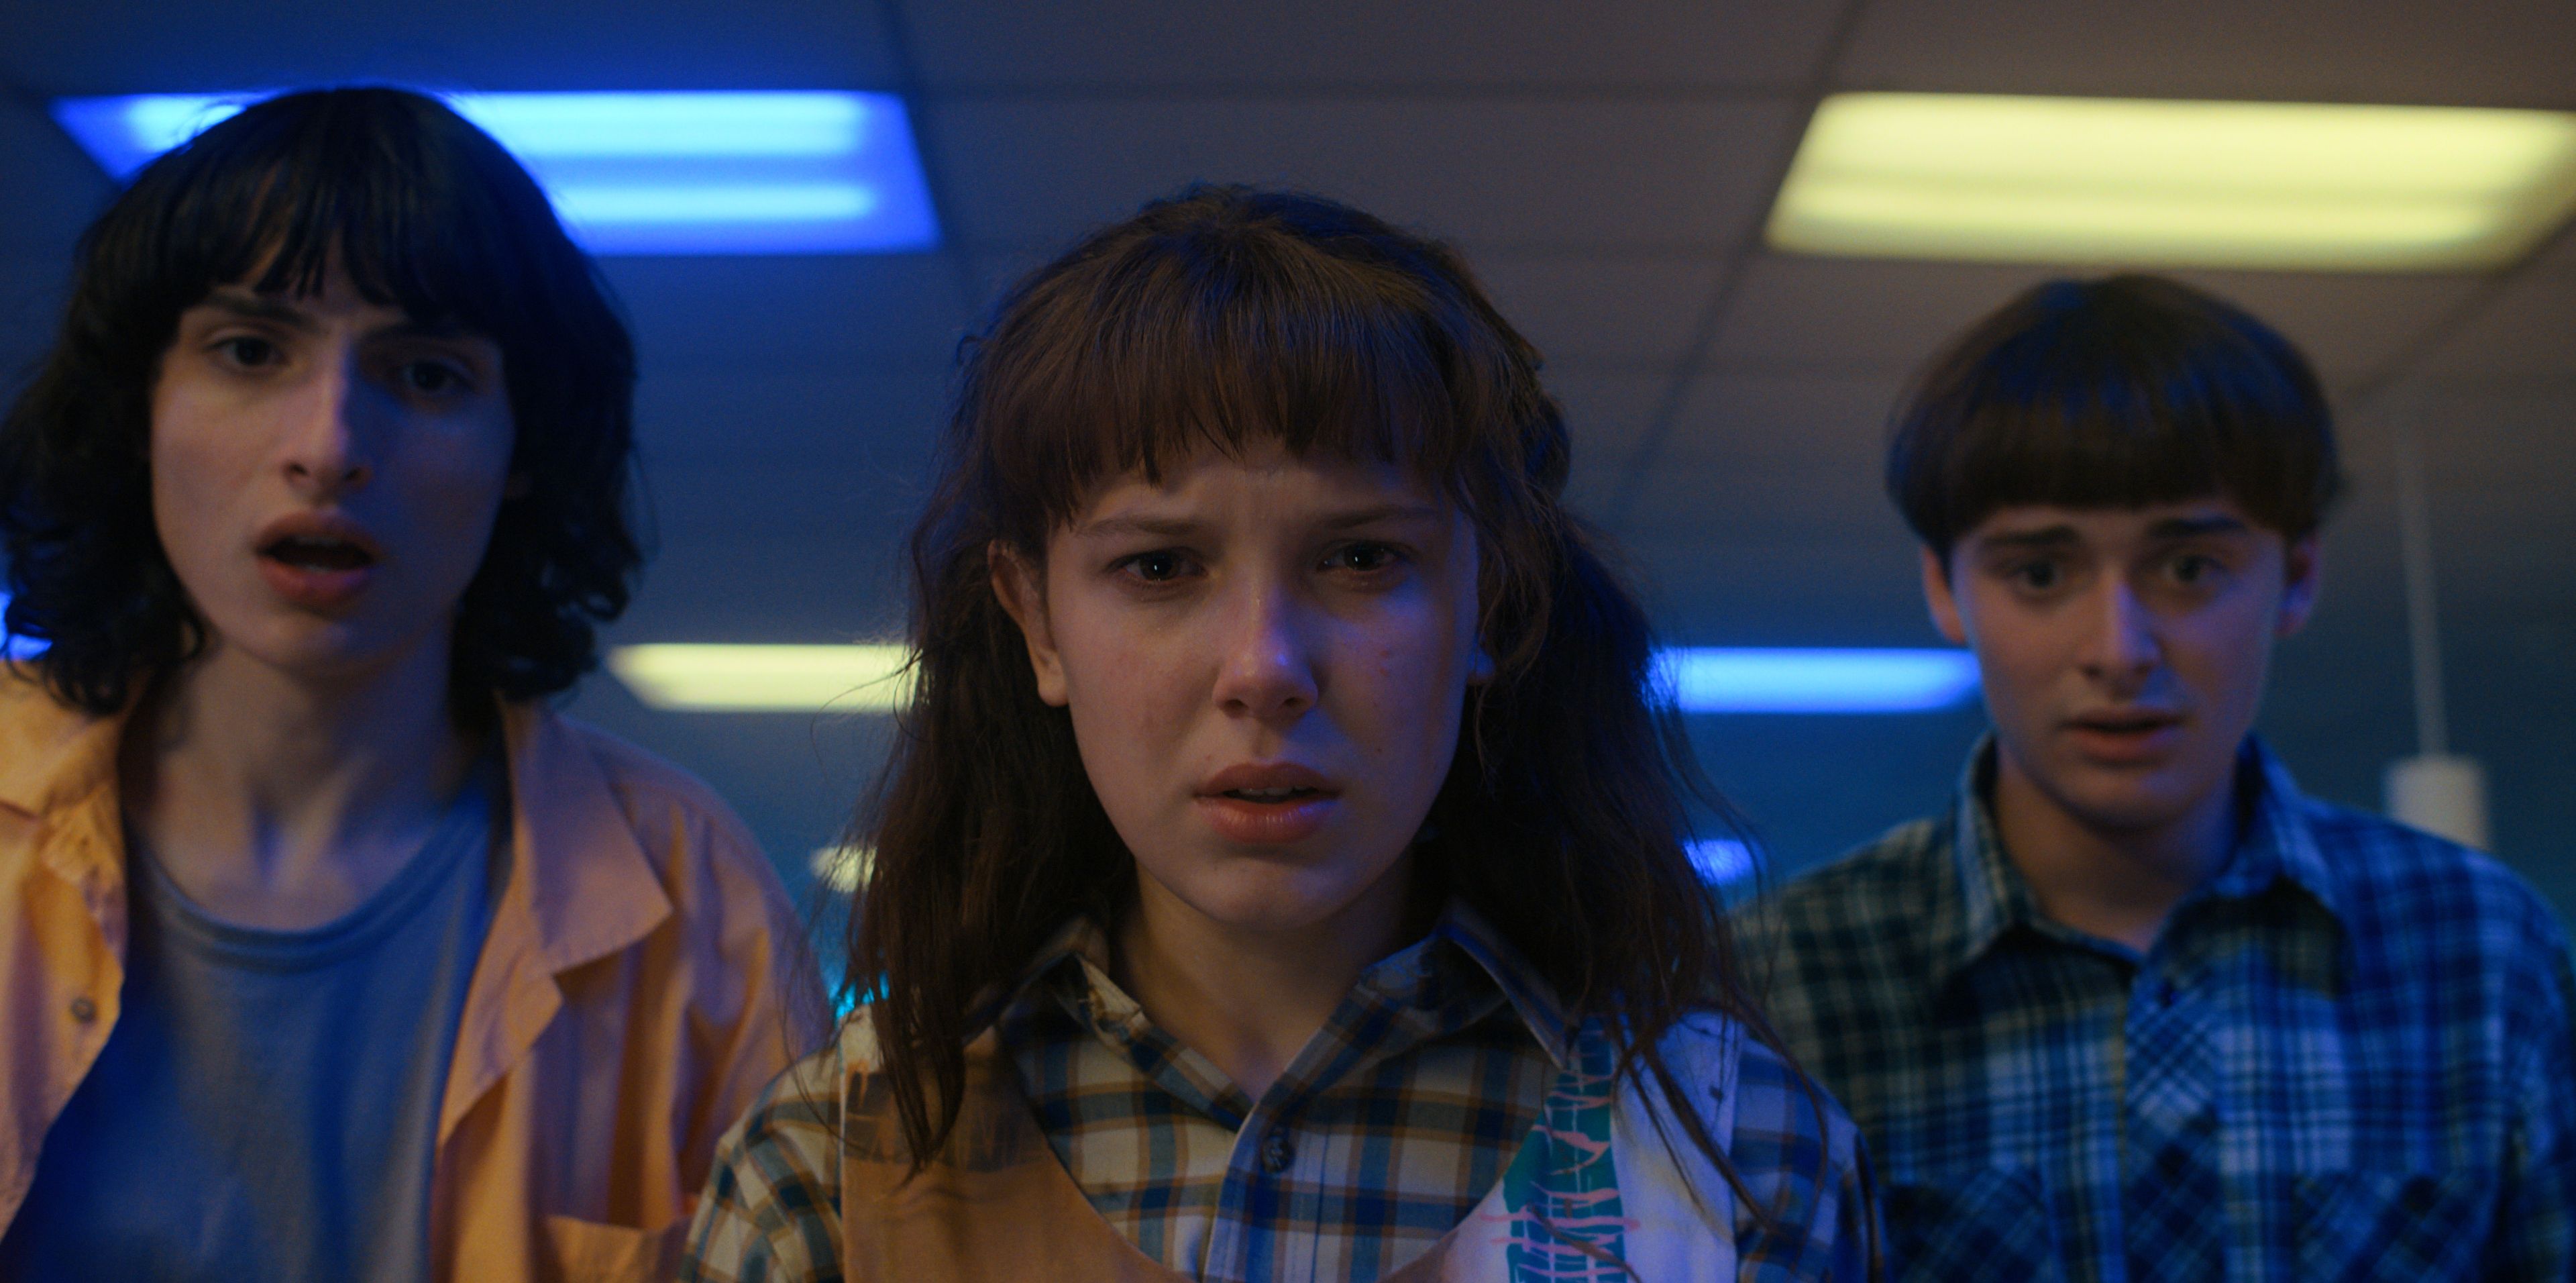 Stranger Things Season 4 Part 2 Release Date Confirmed For July